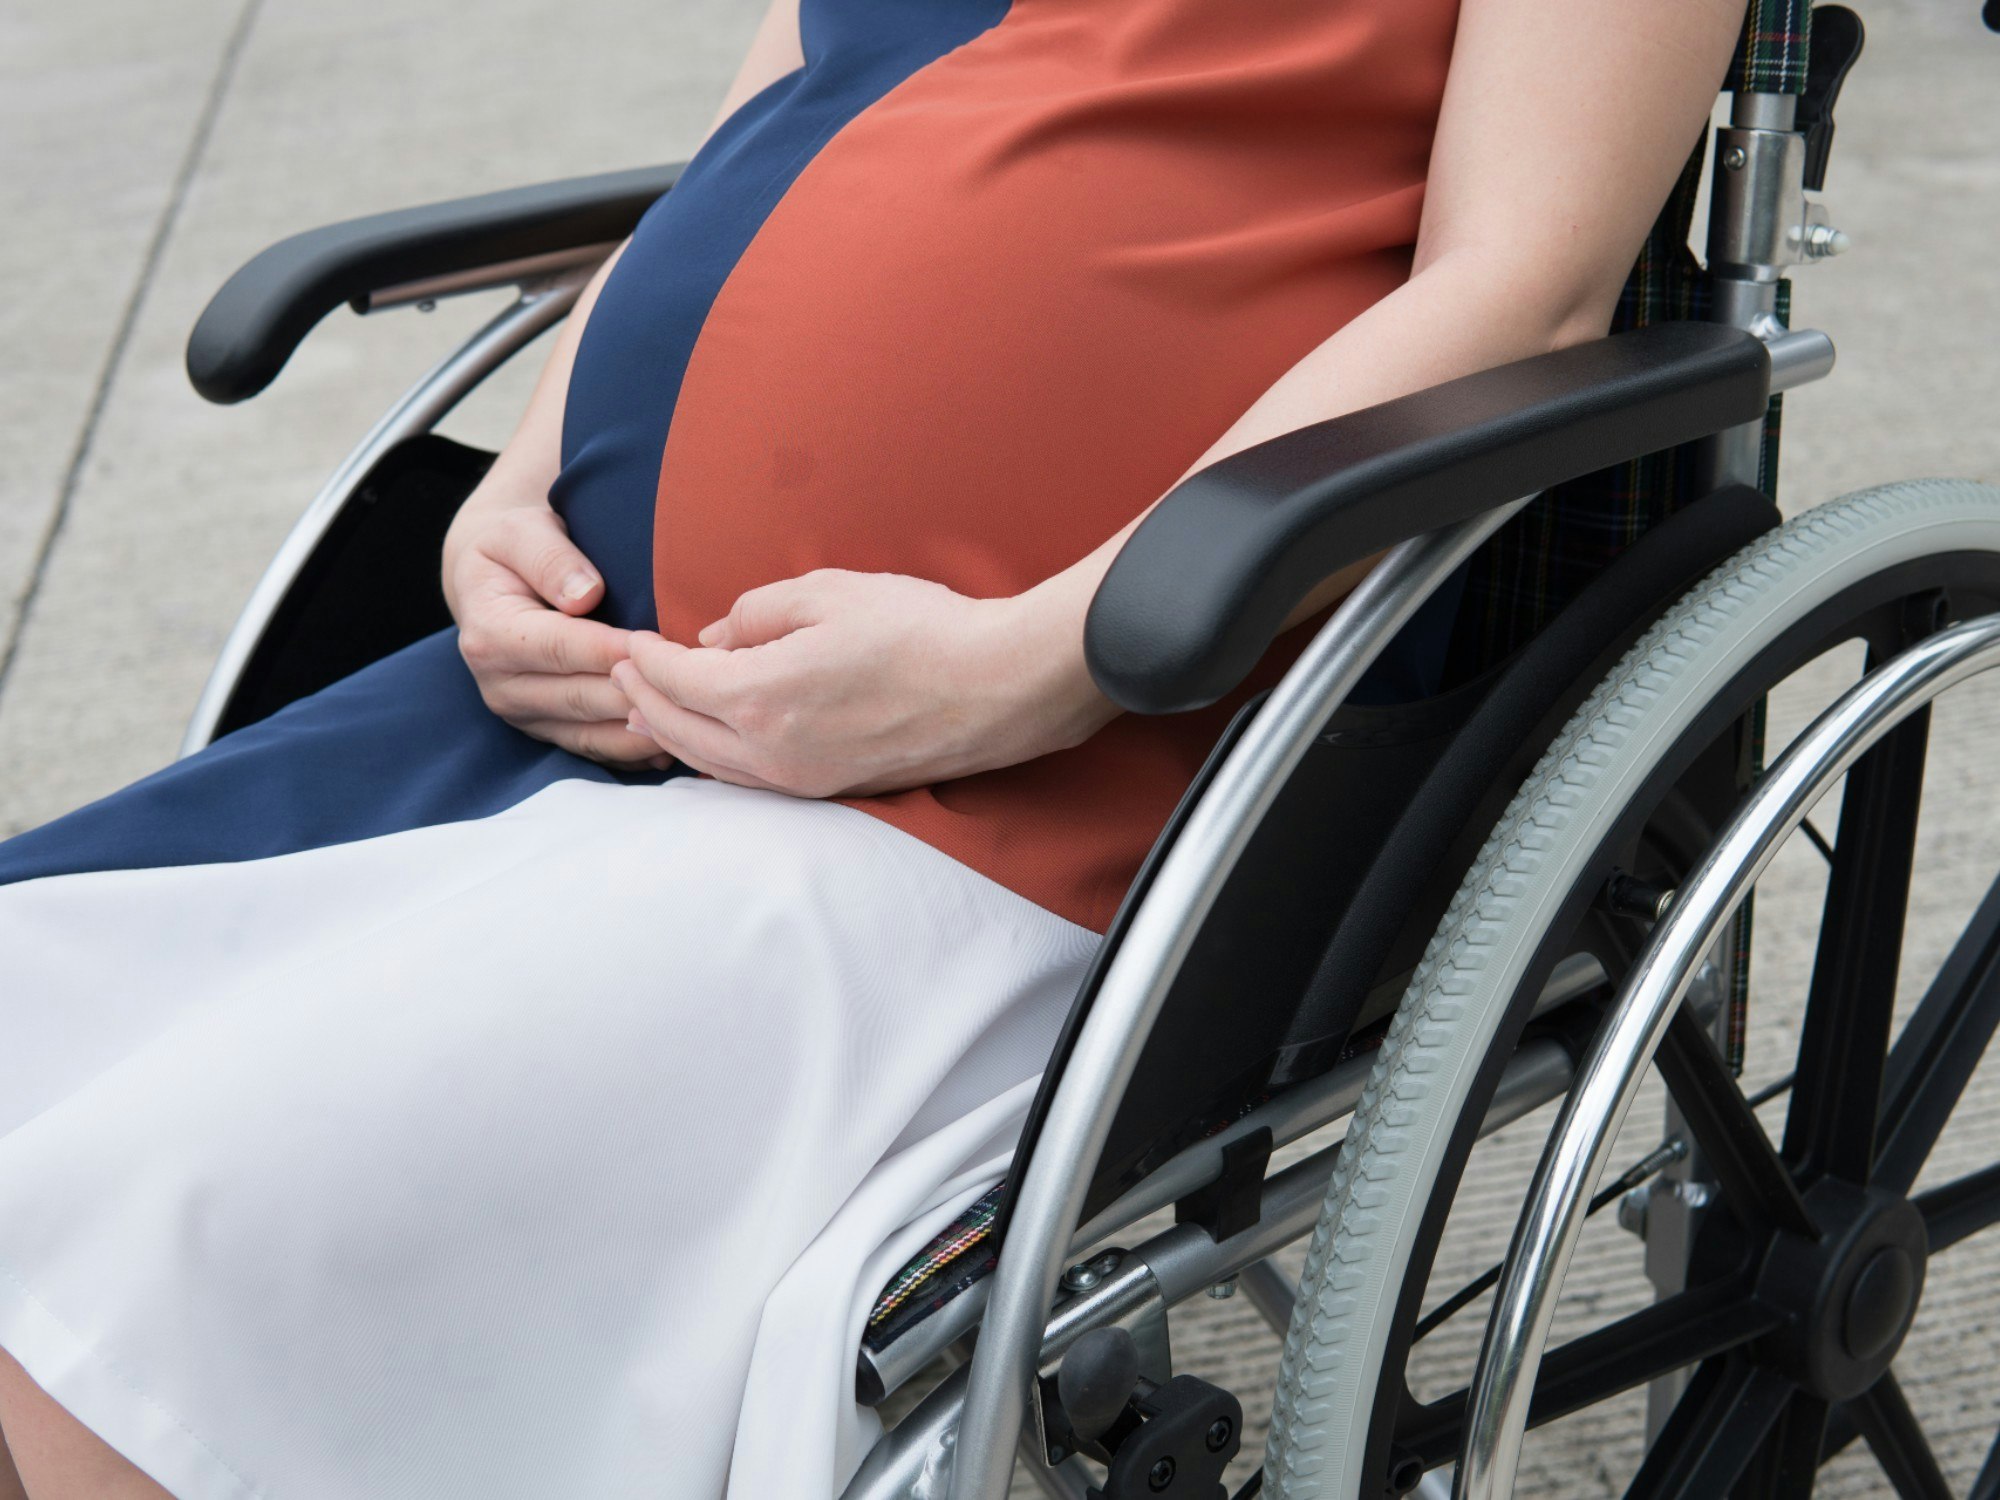 A medical record can make all the difference for pregnant women with a disability receiving pregnancy care. [Source: Shutterstock]
